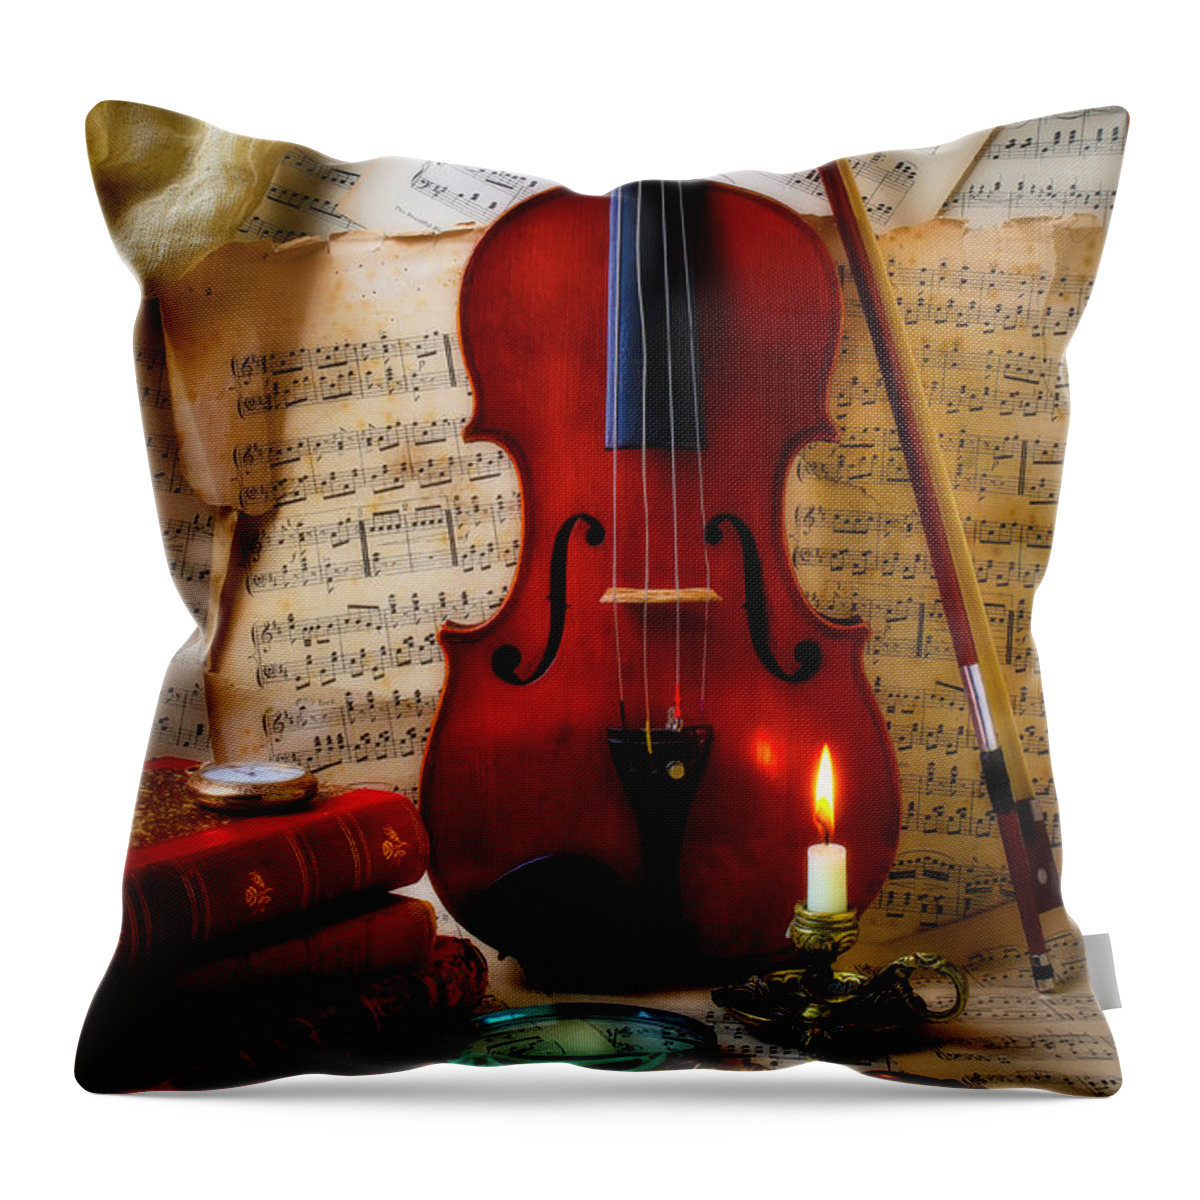 Violin Throw Pillow featuring the photograph Violin With Sheet Music And Candle by Garry Gay